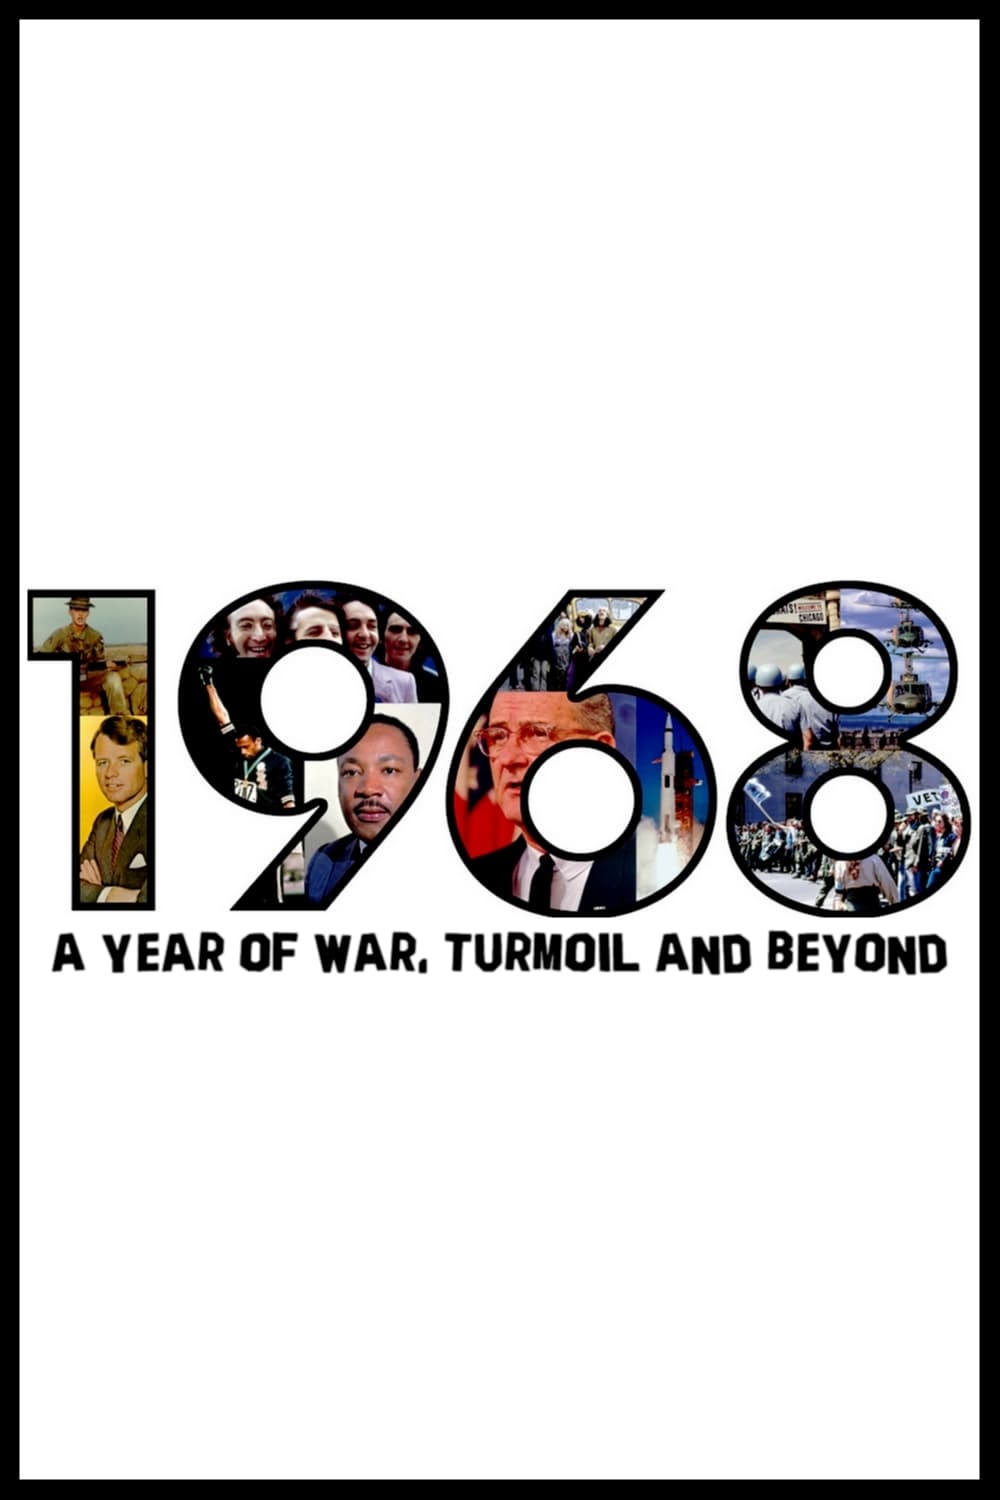 1968: A Year of War, Turmoil and Beyond (2018)